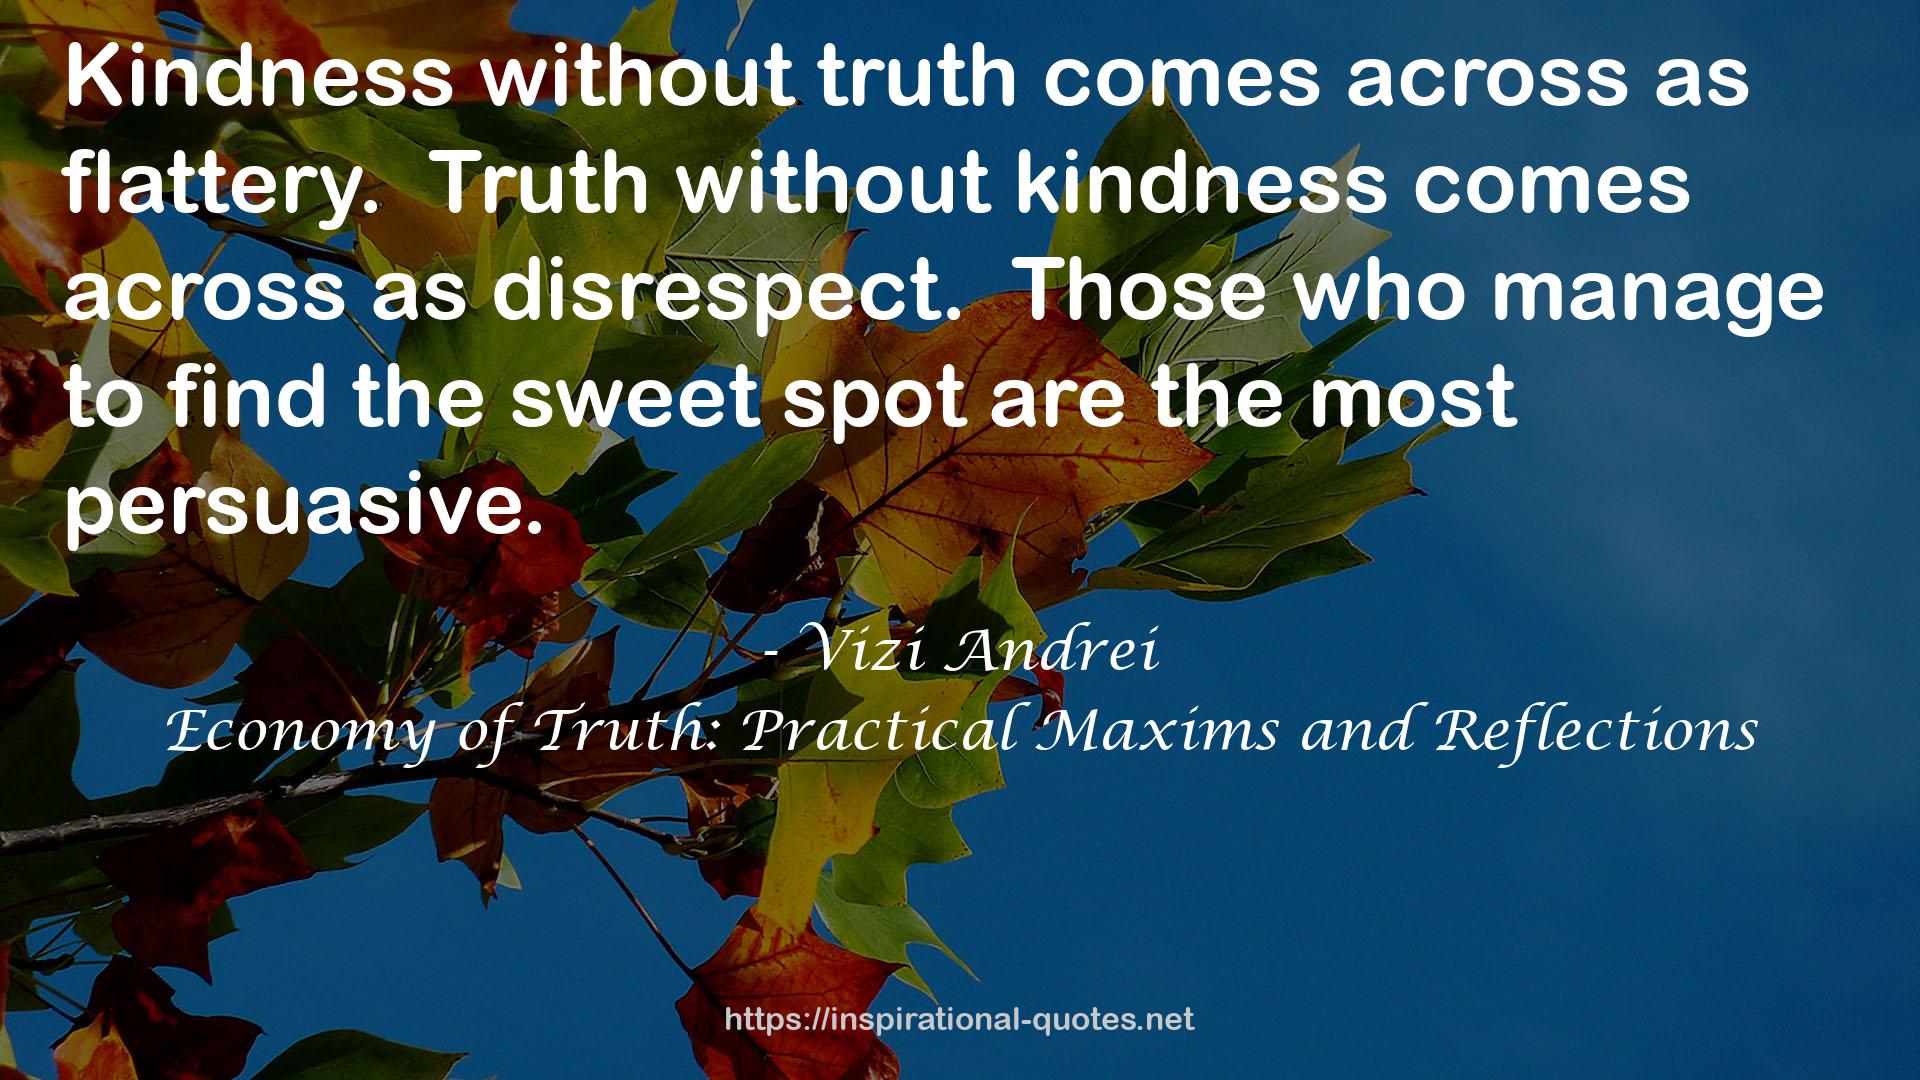 Economy of Truth: Practical Maxims and Reflections QUOTES